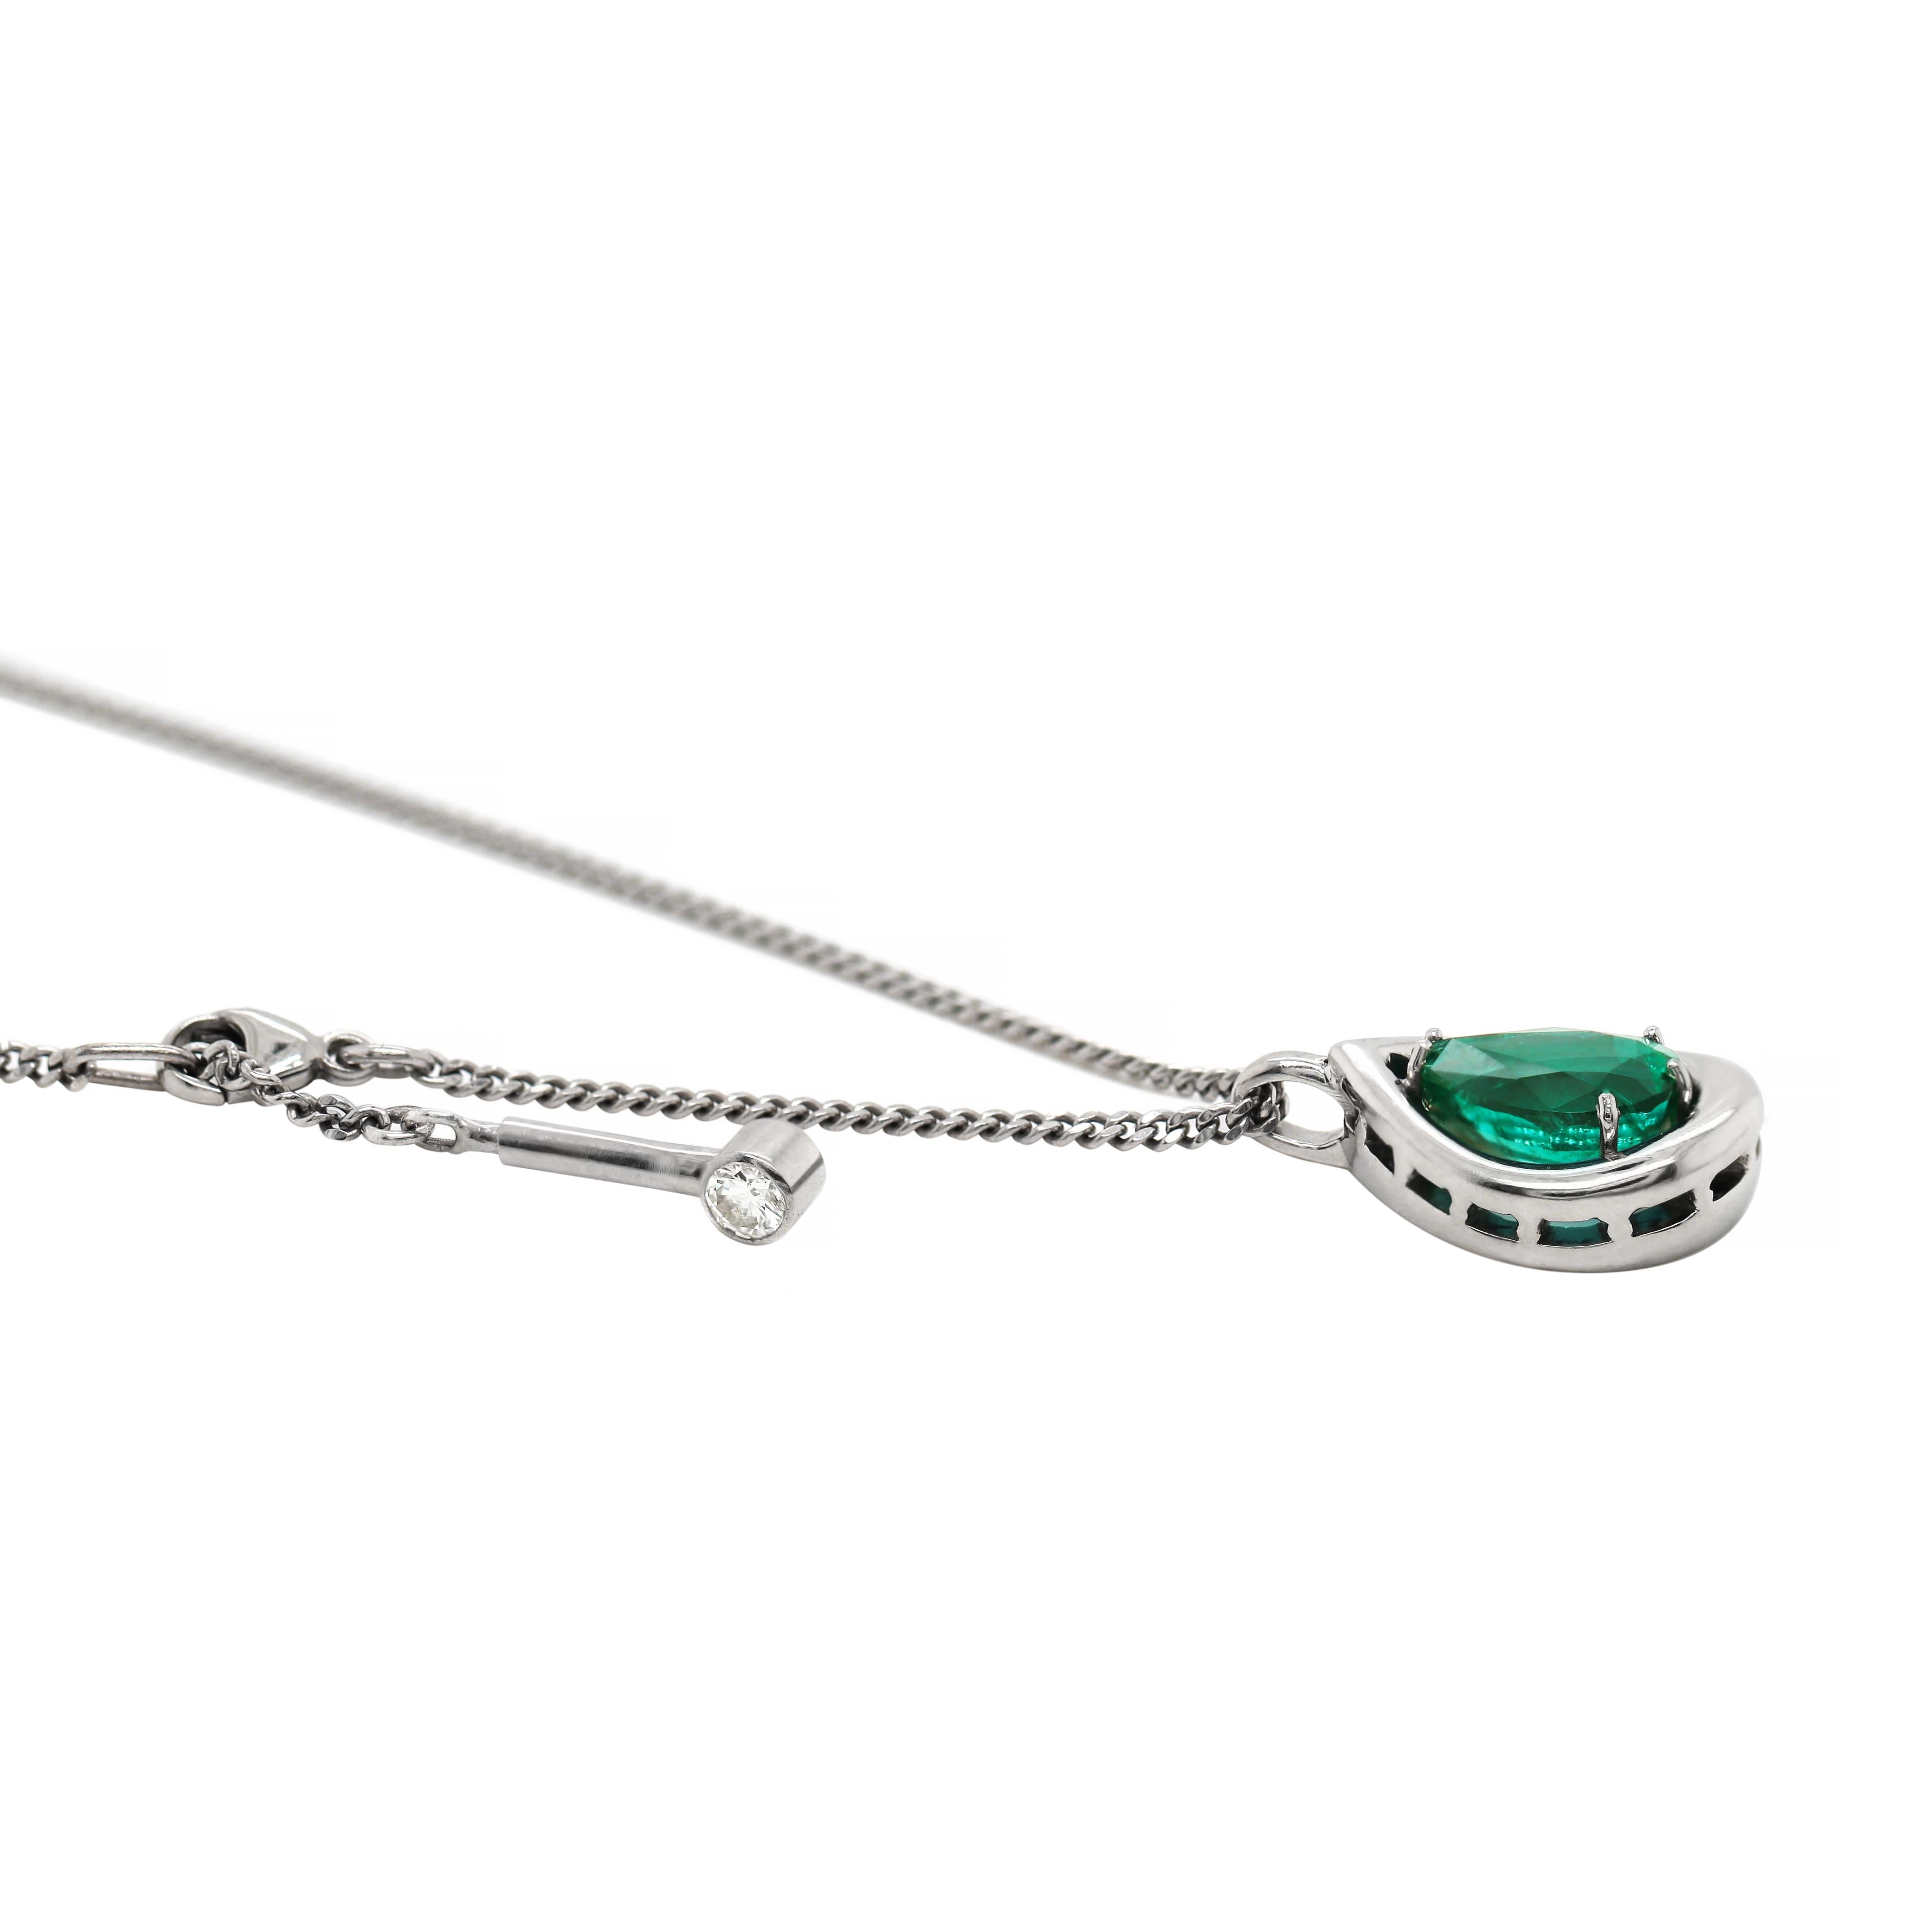 This lovely hand made necklace features a tear drop solid platinum pendant, set with a pear shaped emerald in the centre weighing 3.36ct. The pendant hangs from a fine platinum 15